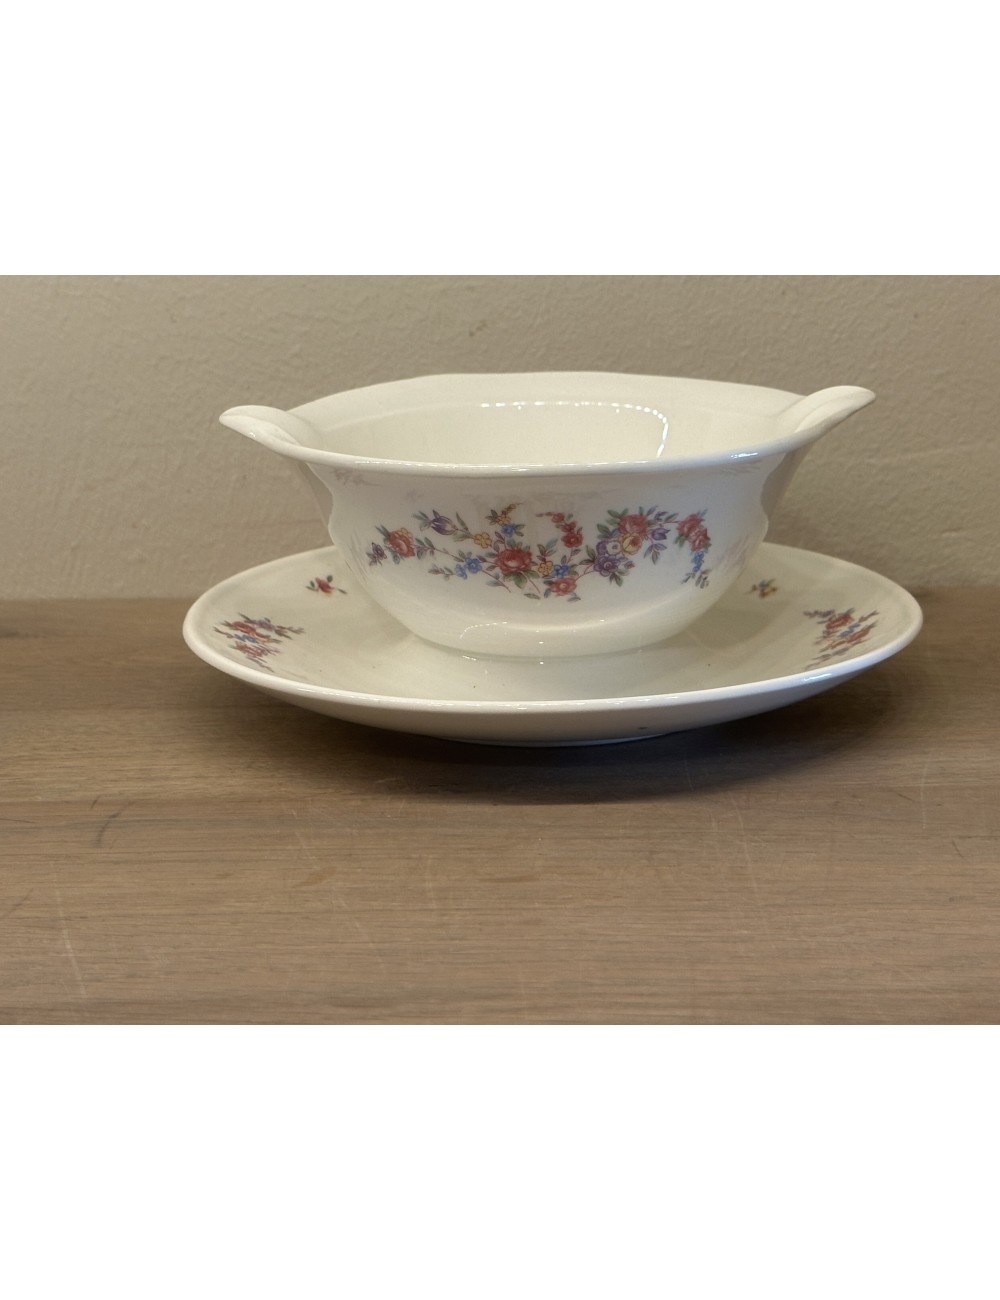 Gravy boat / Sauce boat - round model with 2 spouts - Petrus Regout - décor executed with small roses and flowers